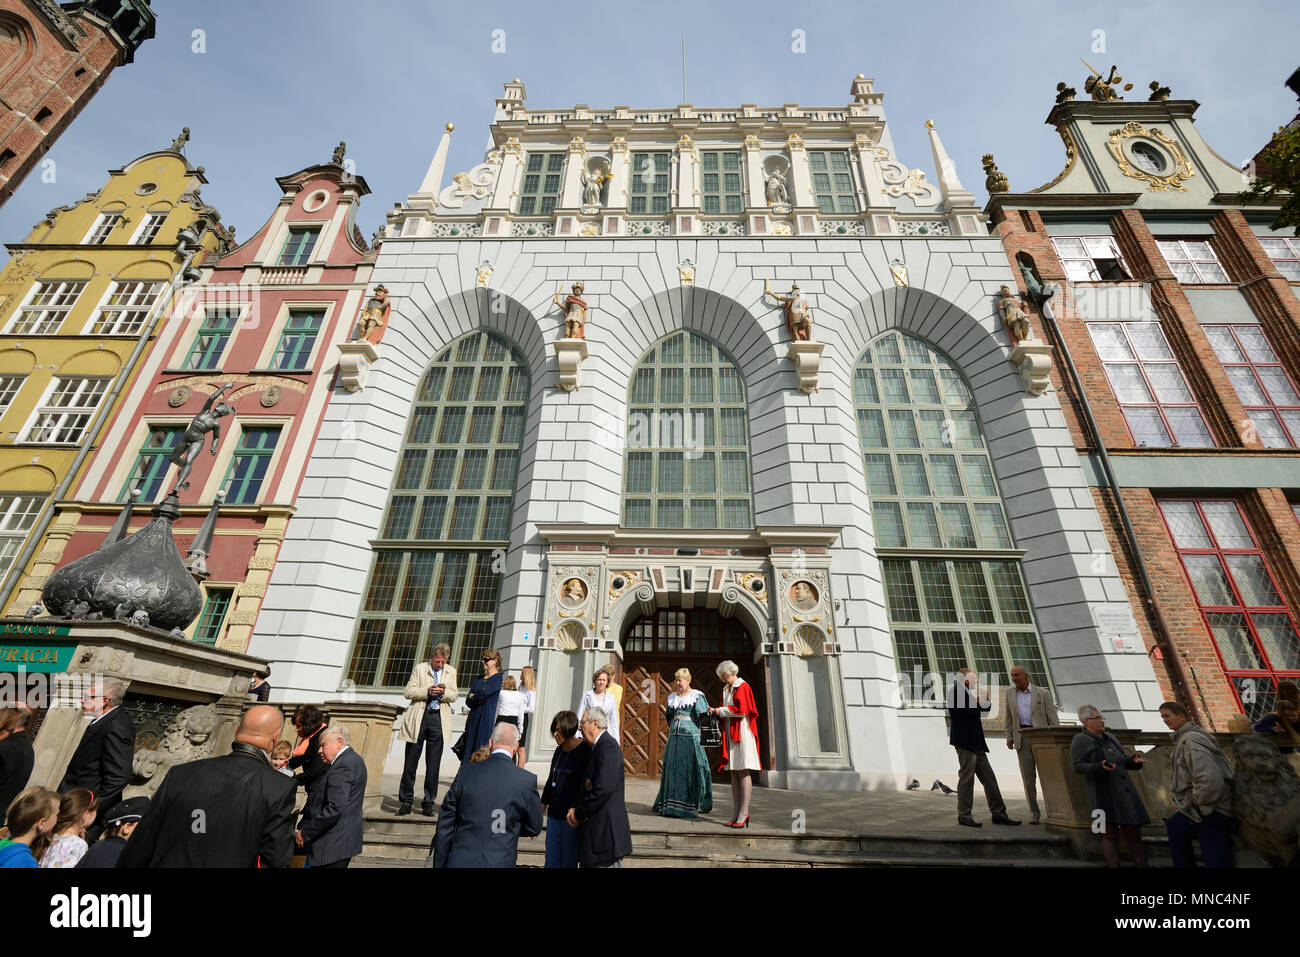 The Artus Court, dating back to 1545. Gdansk, Poland Stock Photo